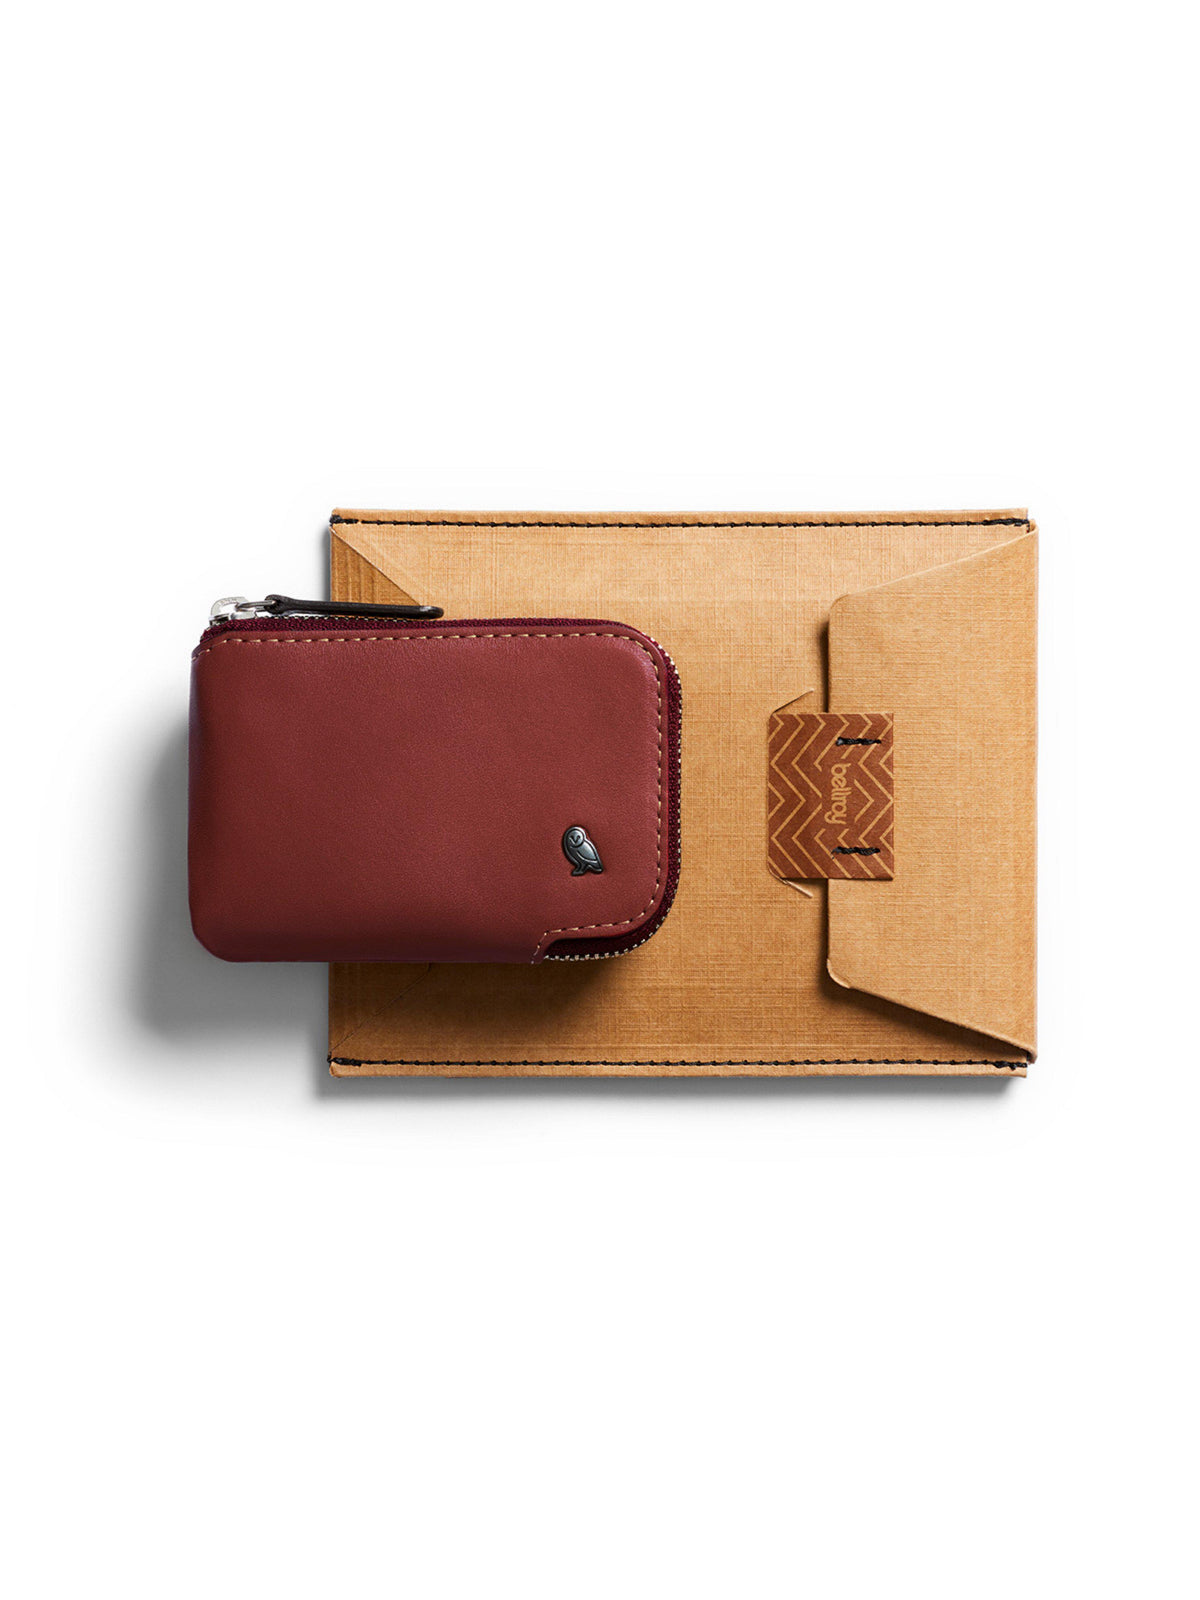 Bellroy Card Pocket Red Earth